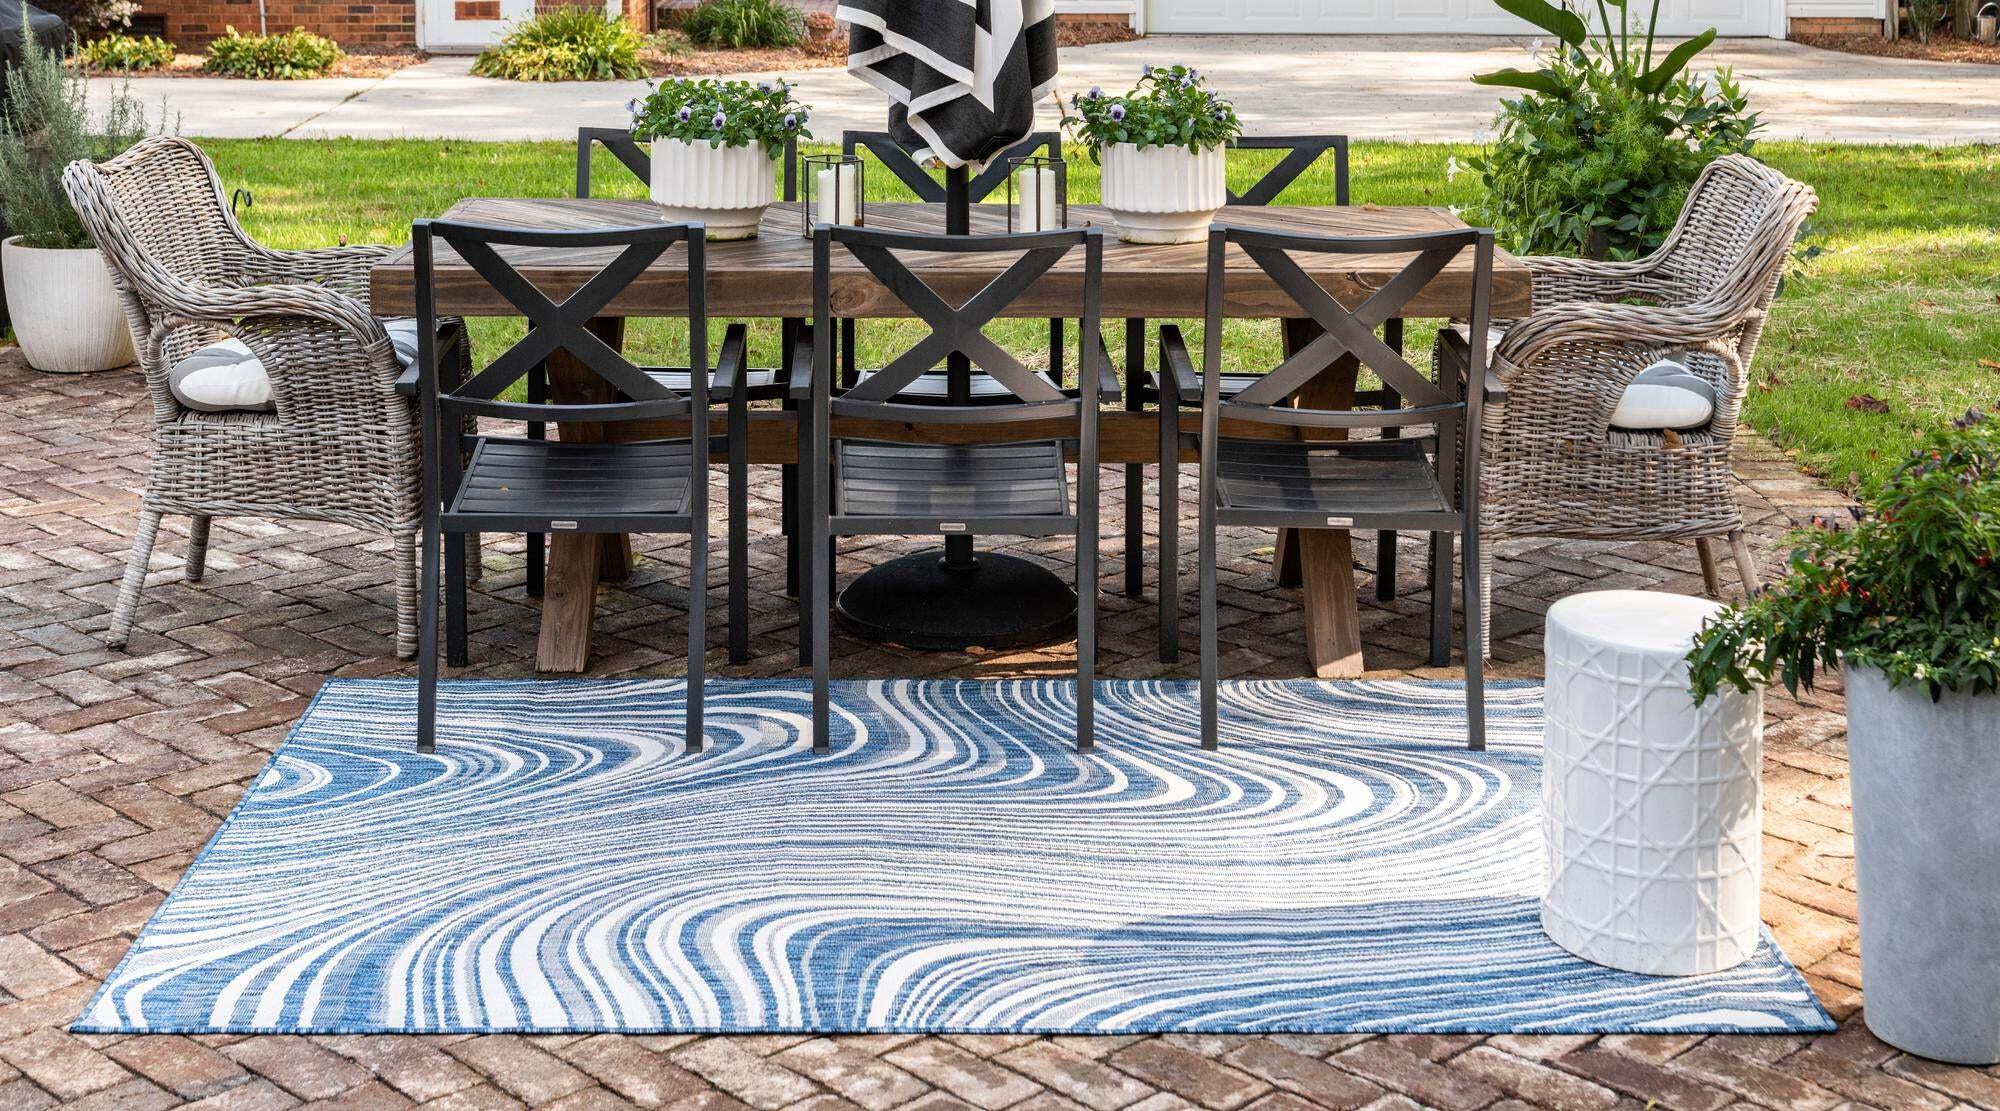 Unique Loom Outdoor Rugs - Outdoor Modern Abstract Rectangular 8x11 Rug Navy Blue & Ivory